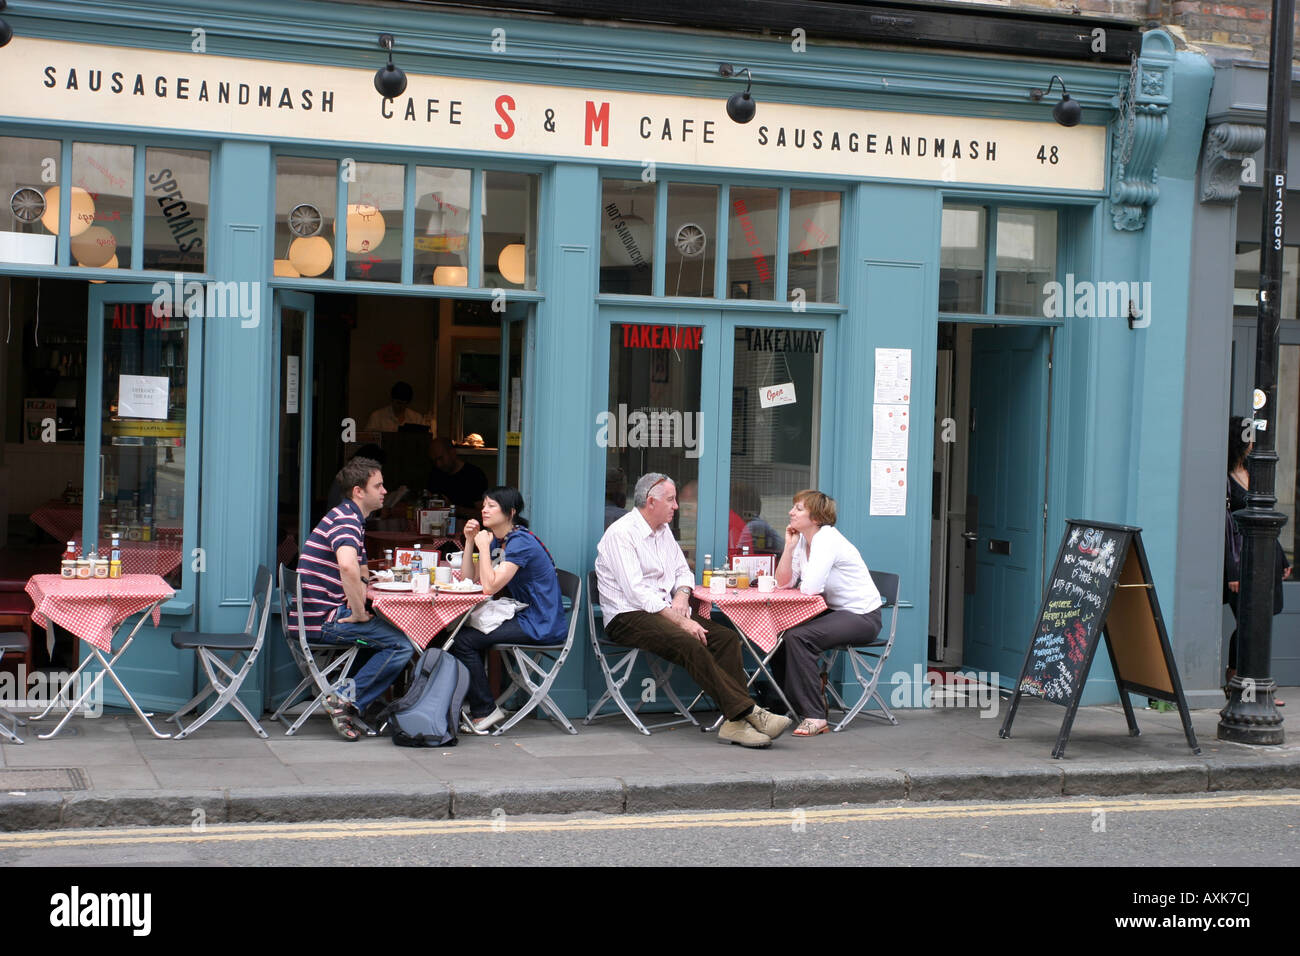 sausage and mash cafe S and M Spitalfields, London Stock Photo